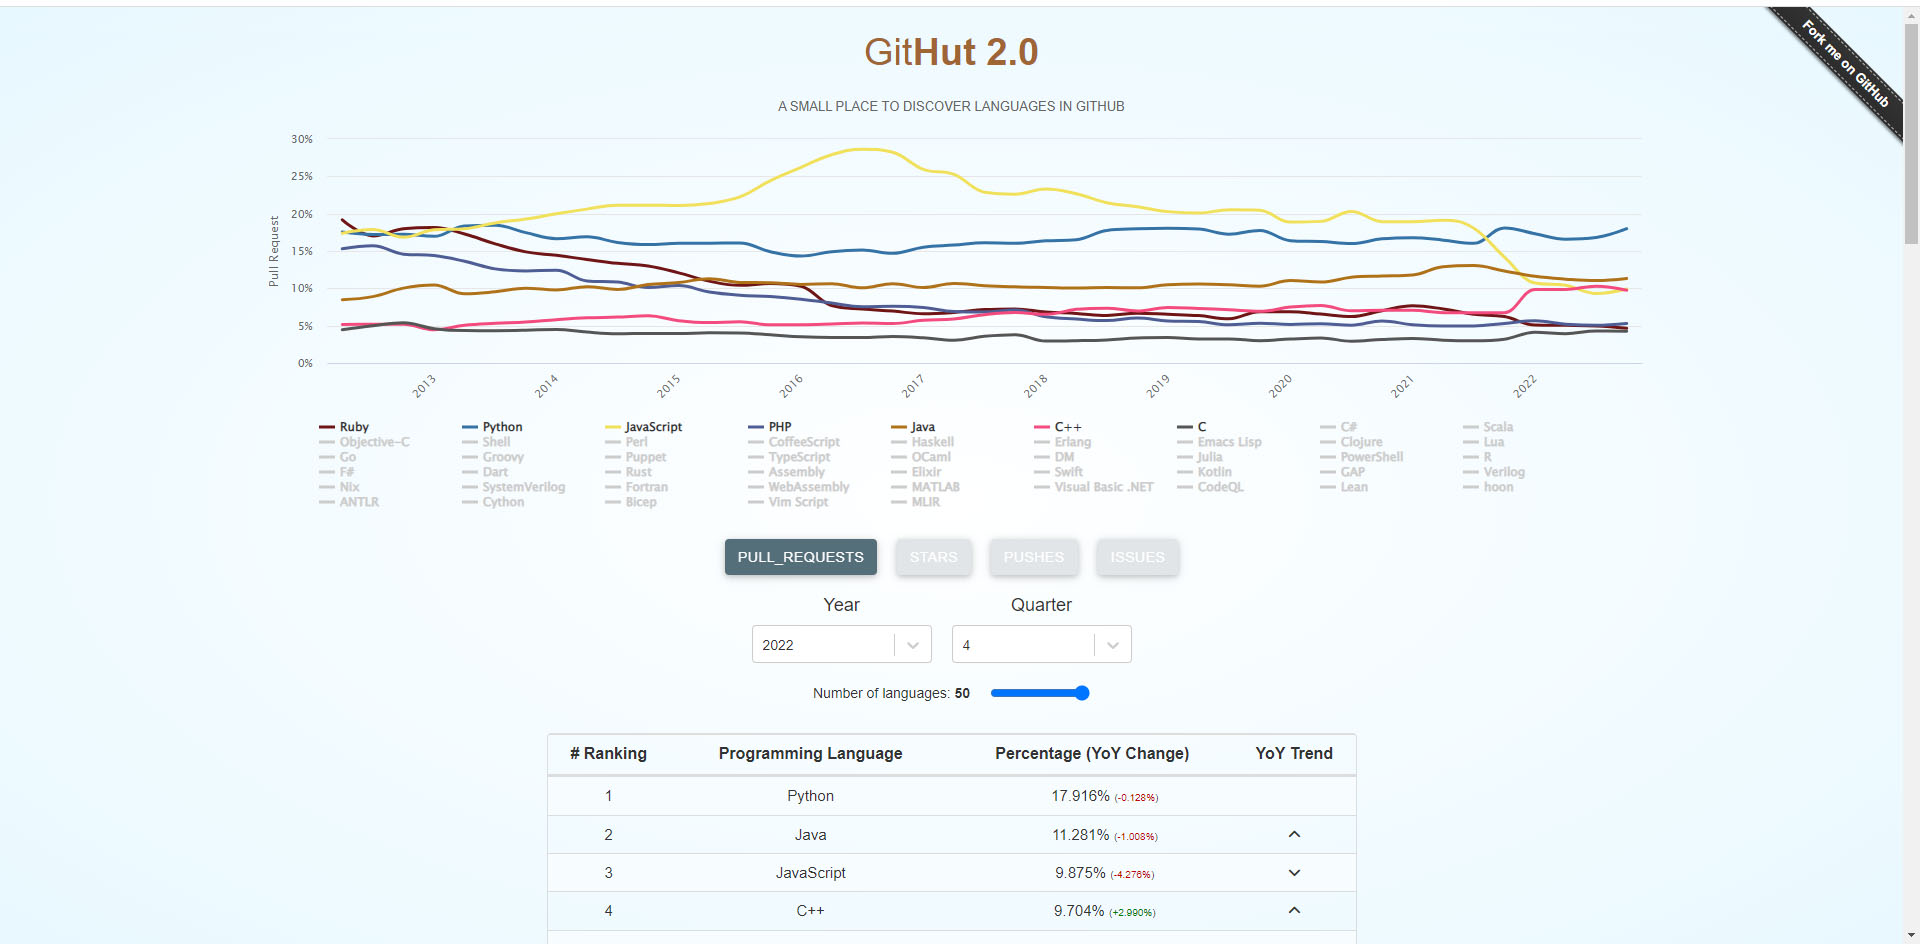 Top languages in GitHub based on Pull requests